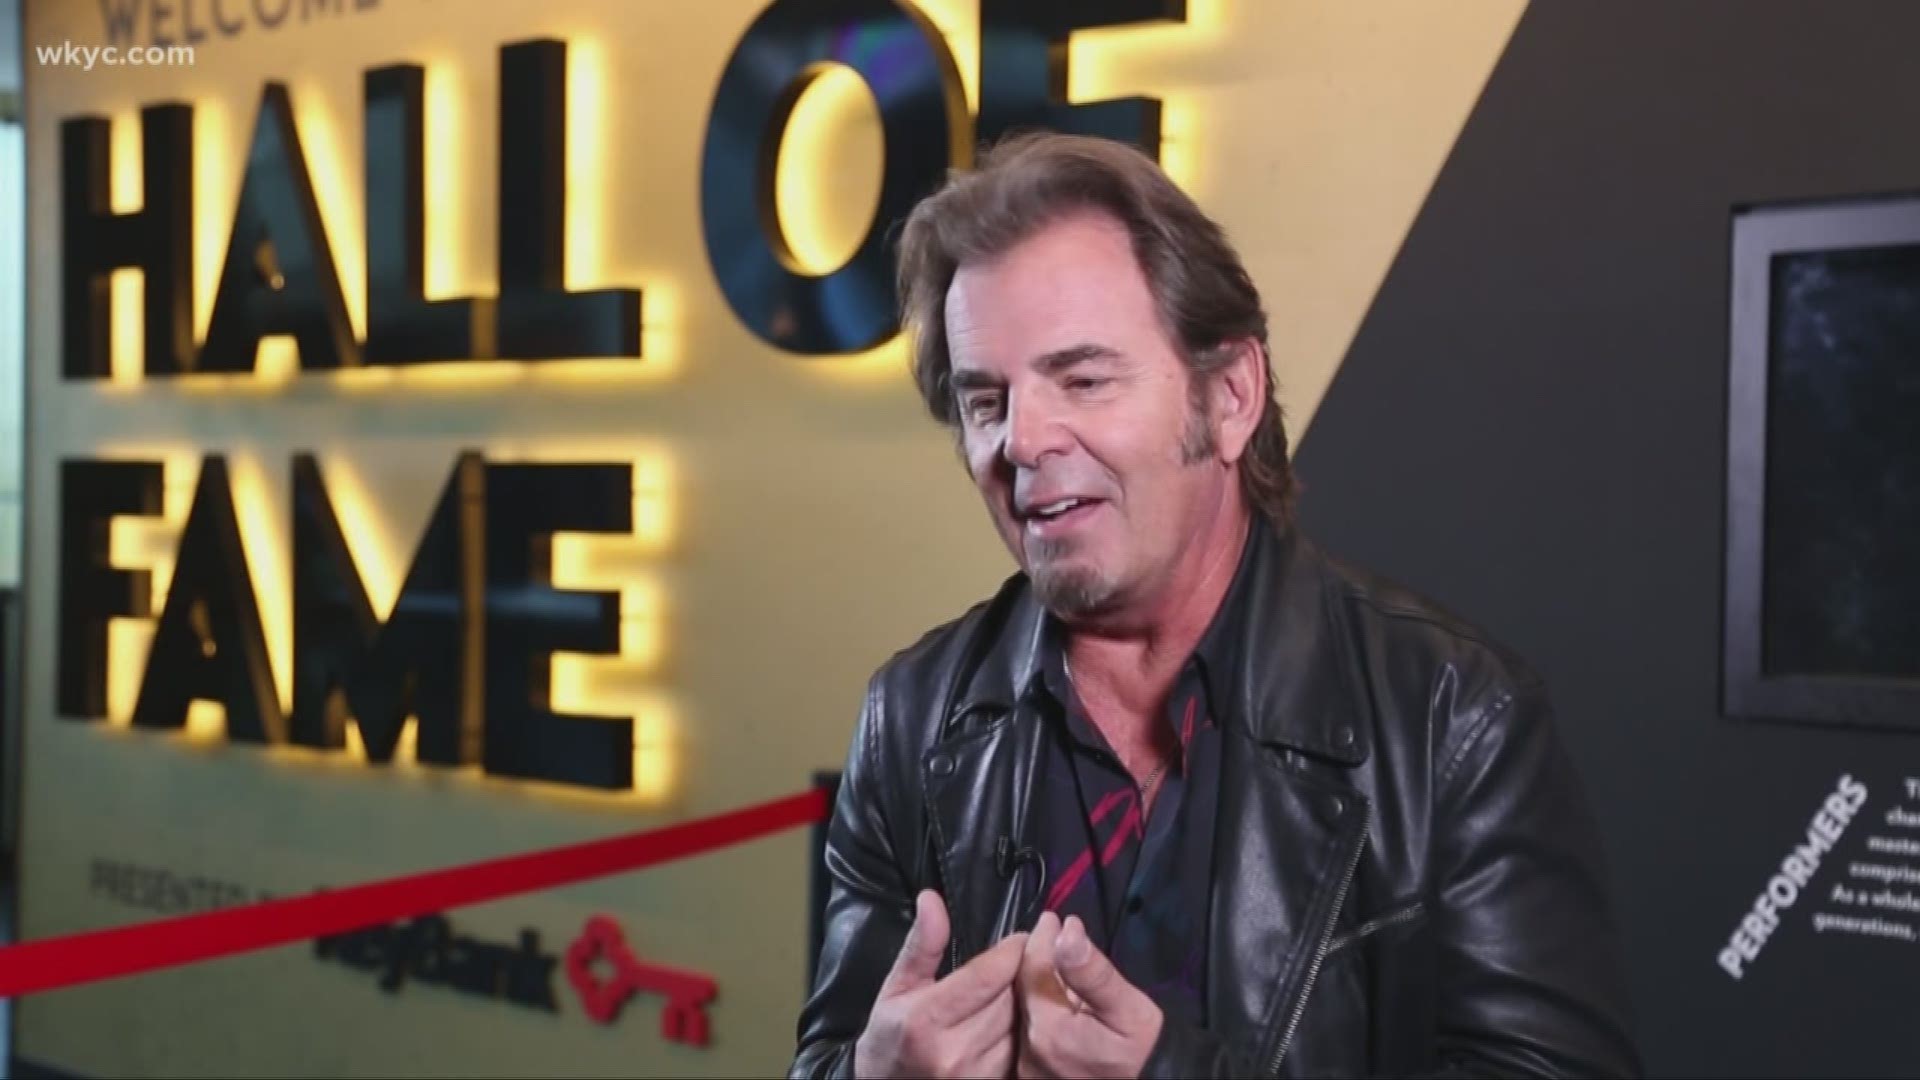 Journey's Jonathan Cain visits Rock & Roll Hall of Fame